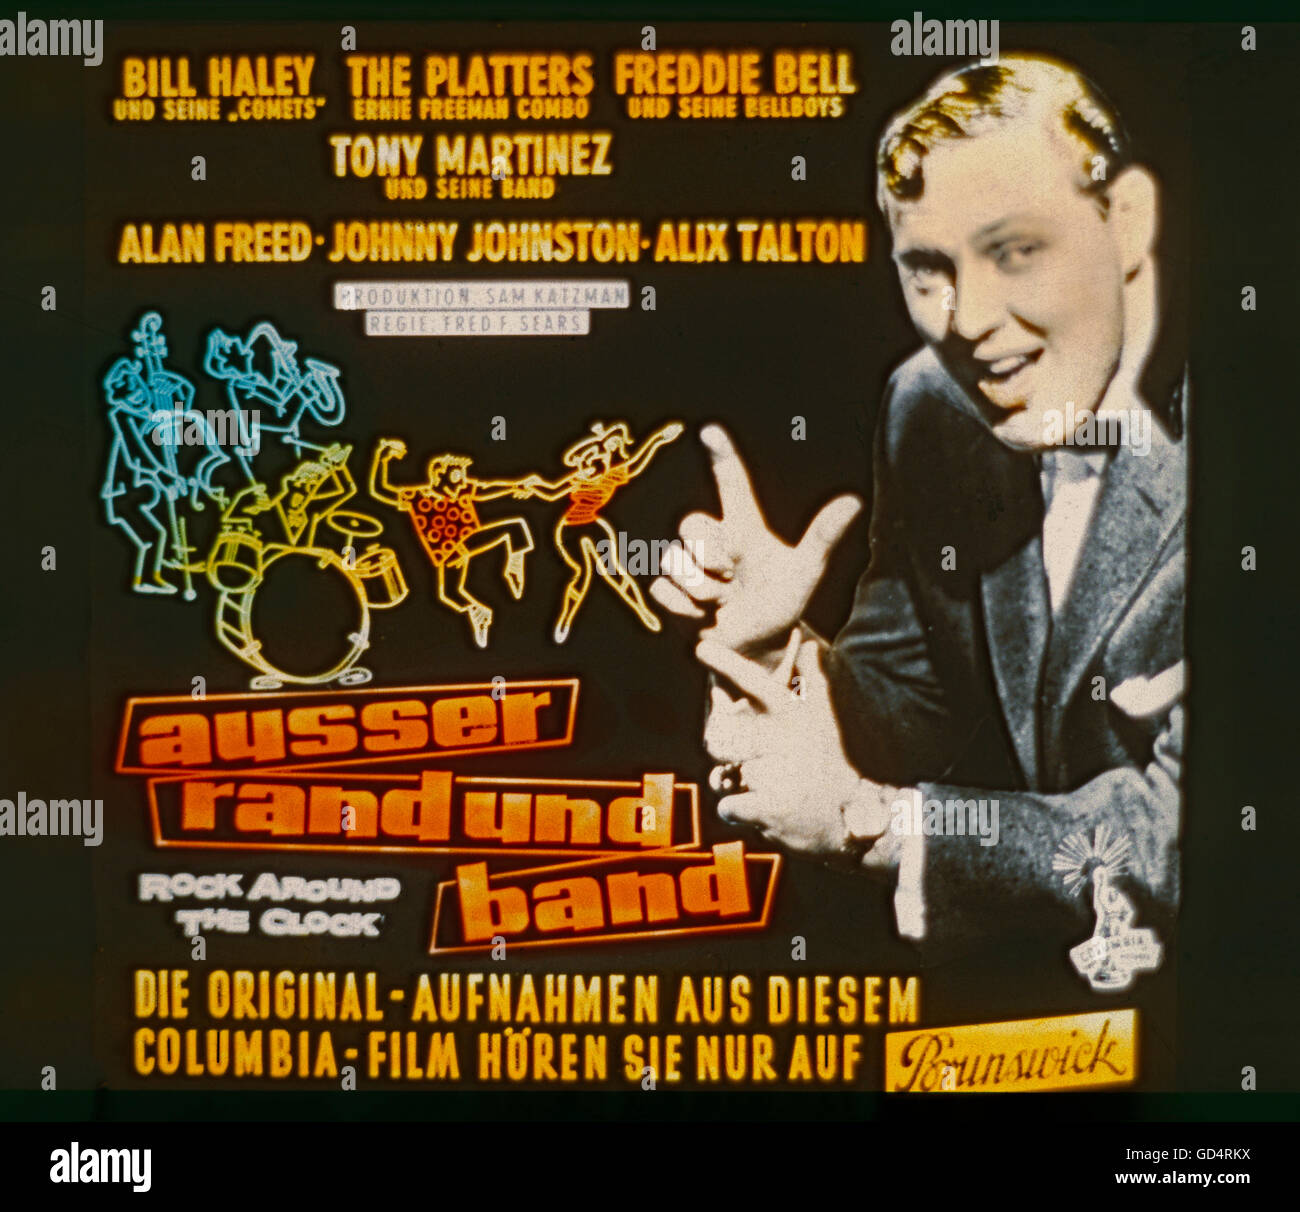 Werbung, Film, Kinofilm zum Film, 'Rock Around the Clock', USA 1956, Regie: Fred F. Sears, Deutschland, 1956, Additional-Rights-Clearences-not available Stockfoto